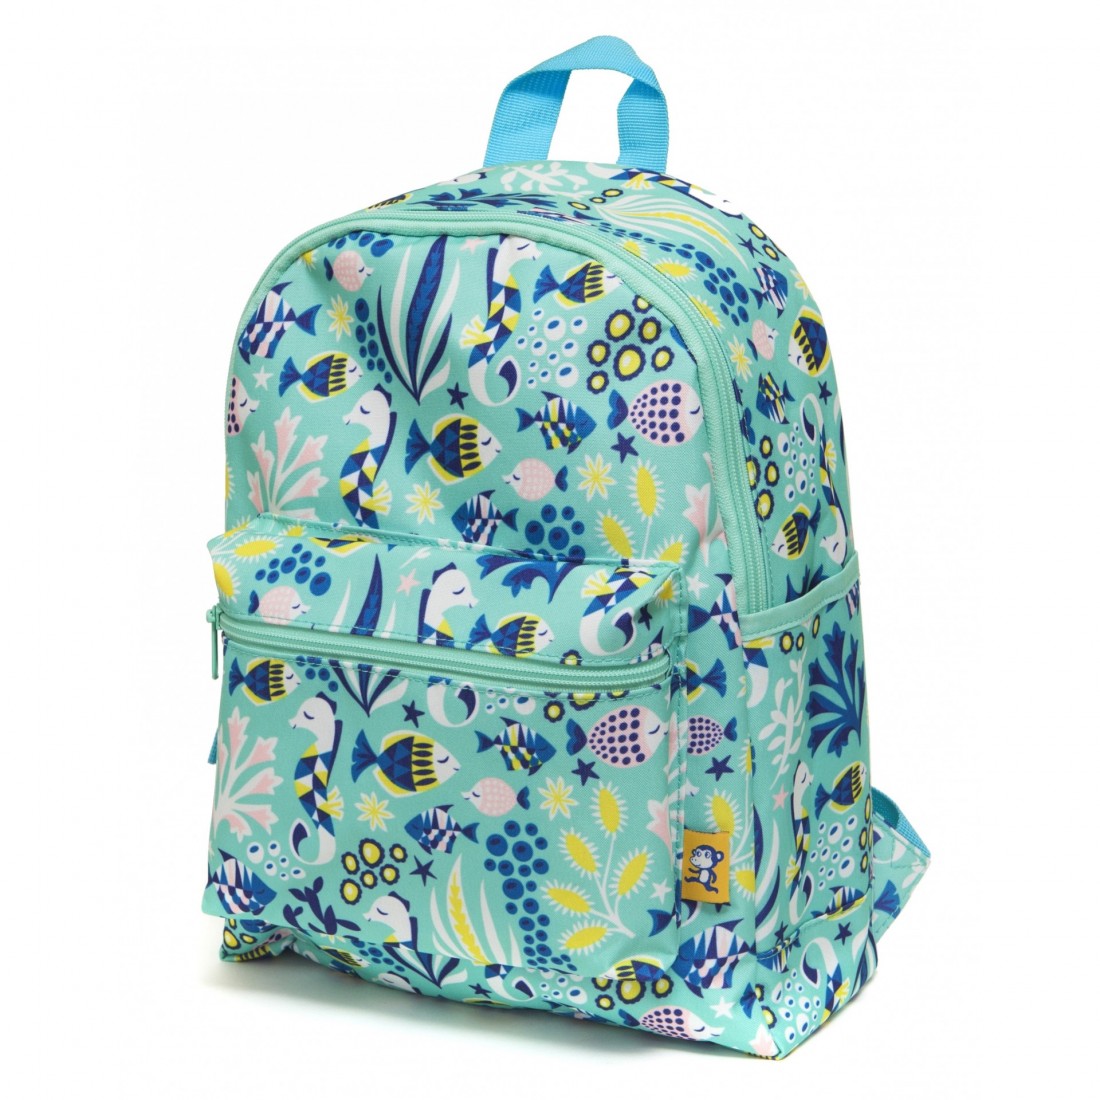 under the sea backpack